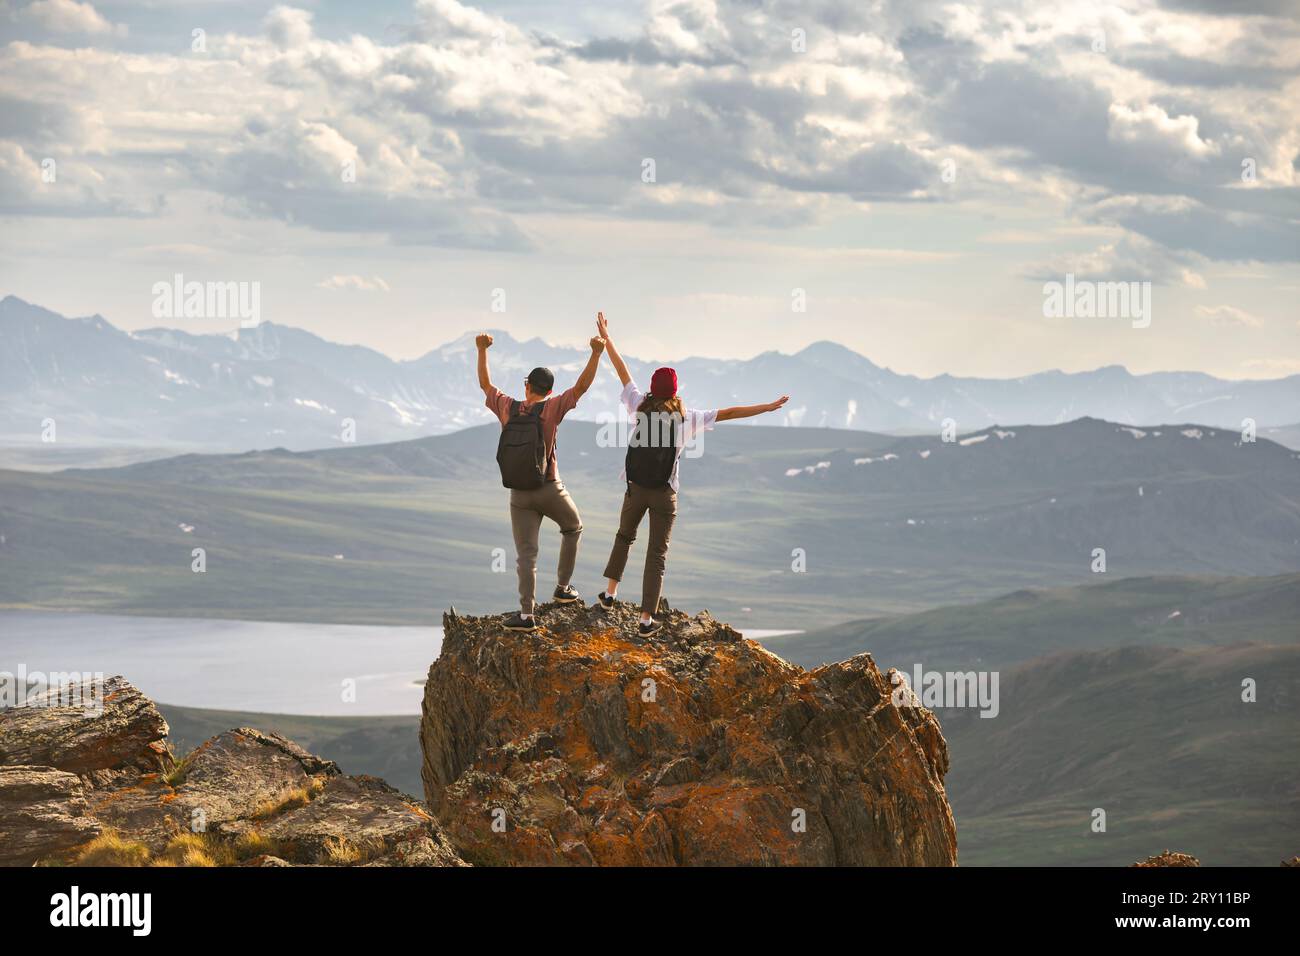 Young couple of hikers with backpacks are standing at mountain top with open arms in winner pose Stock Photo